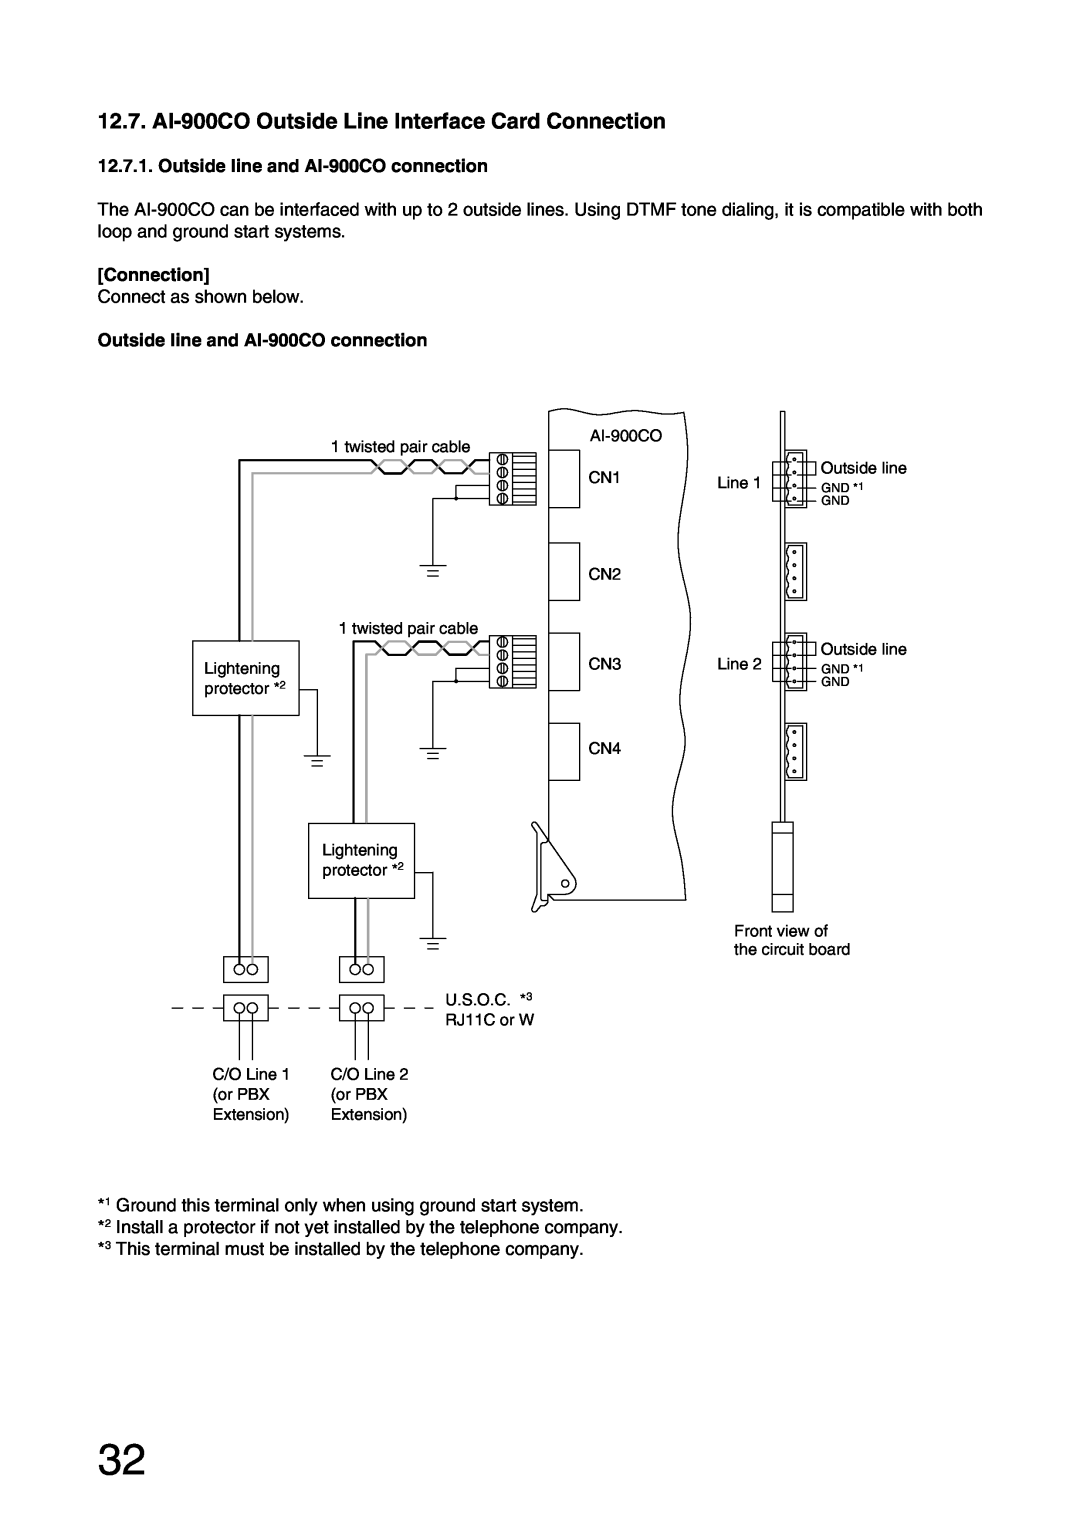 Aiphone installation manual Outside line and AI-900COconnection, Connection 